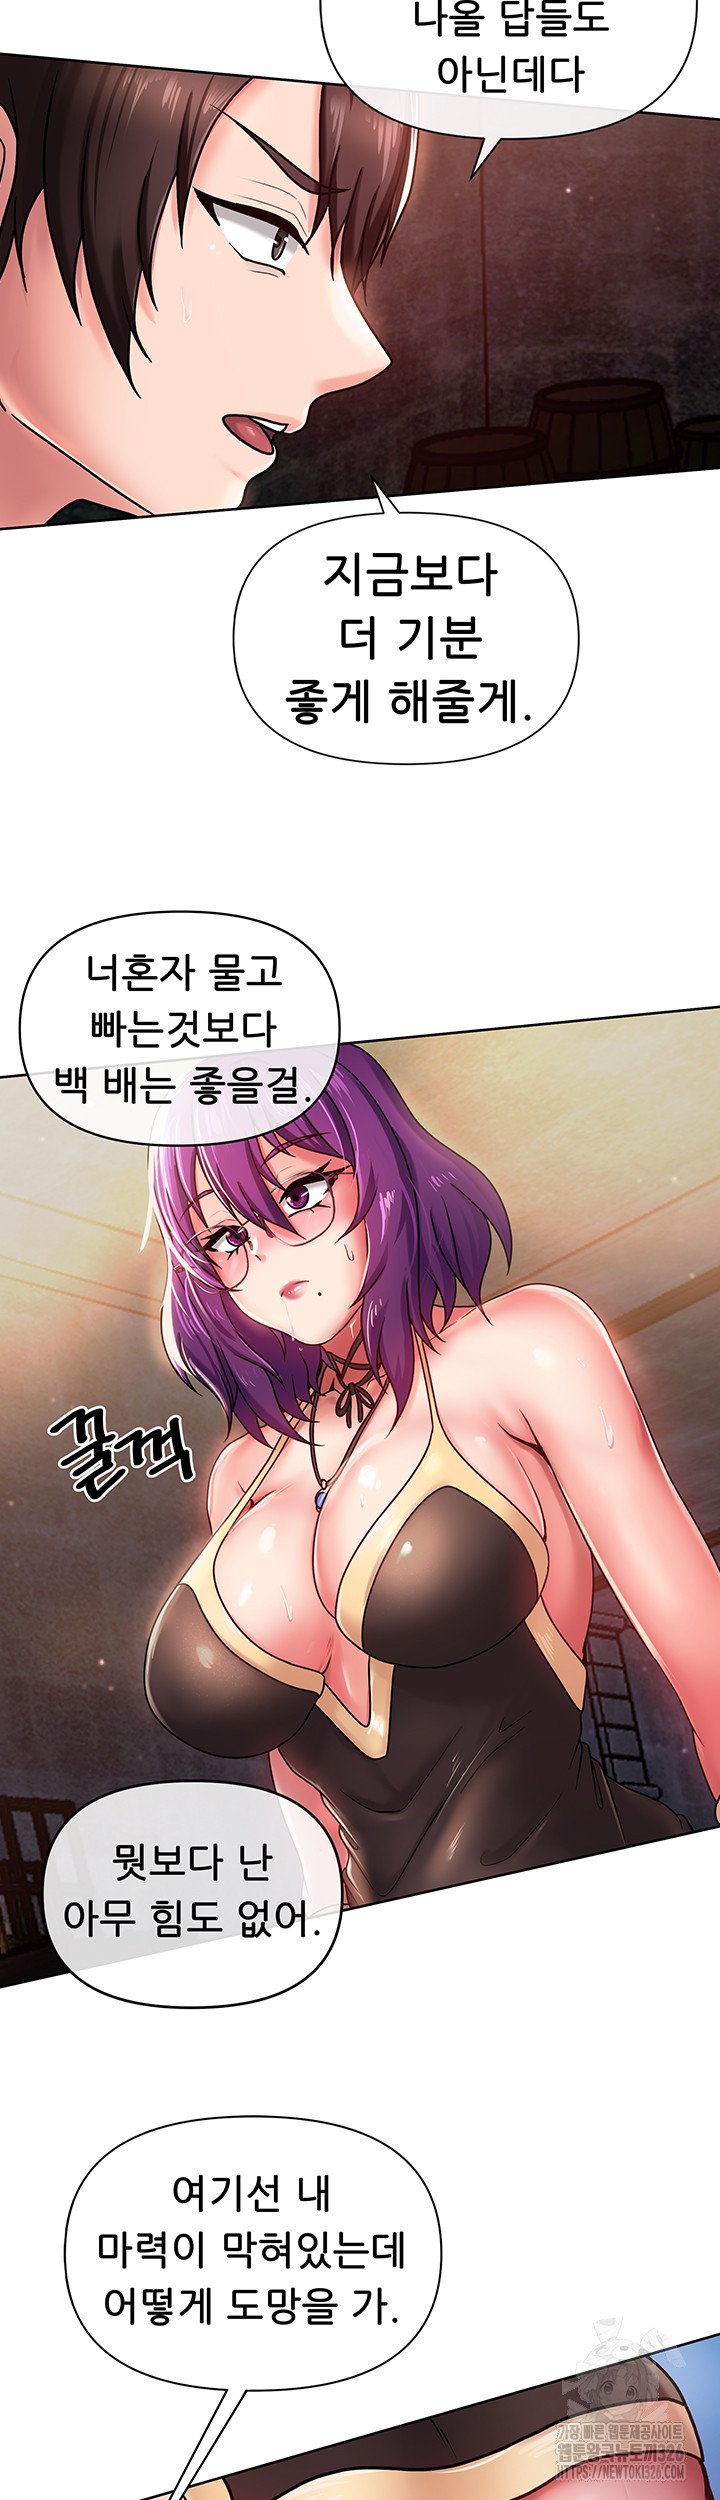 welcome-to-the-isekai-convenience-store-raw-chap-2-44